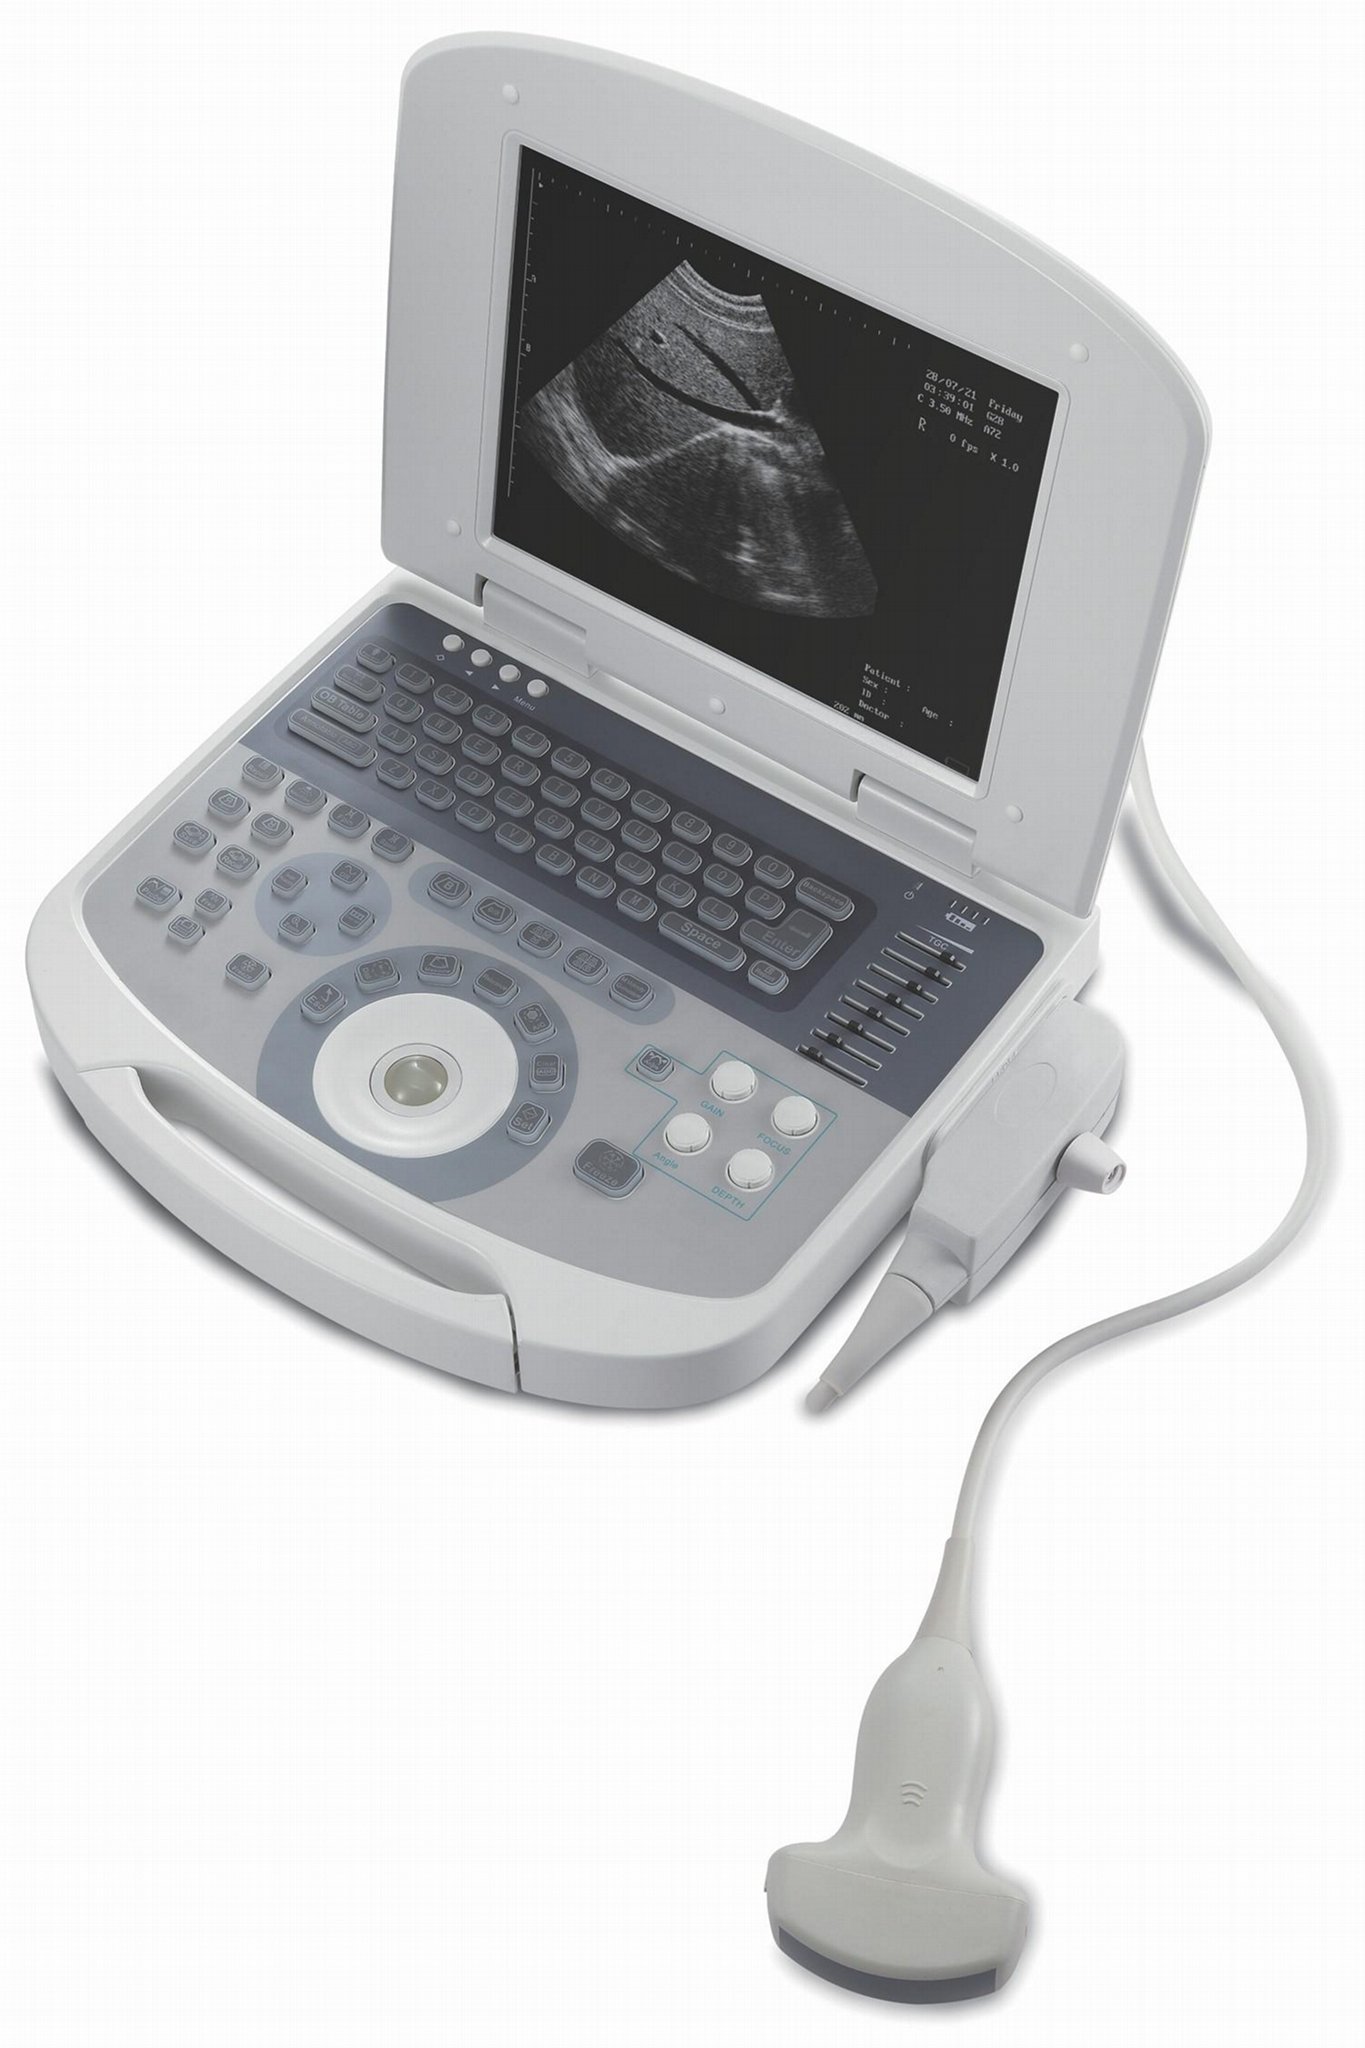 Dolphi PRO Convex Probe Standard B/W Ultrasound Scanner Ce & ISO Approved 5